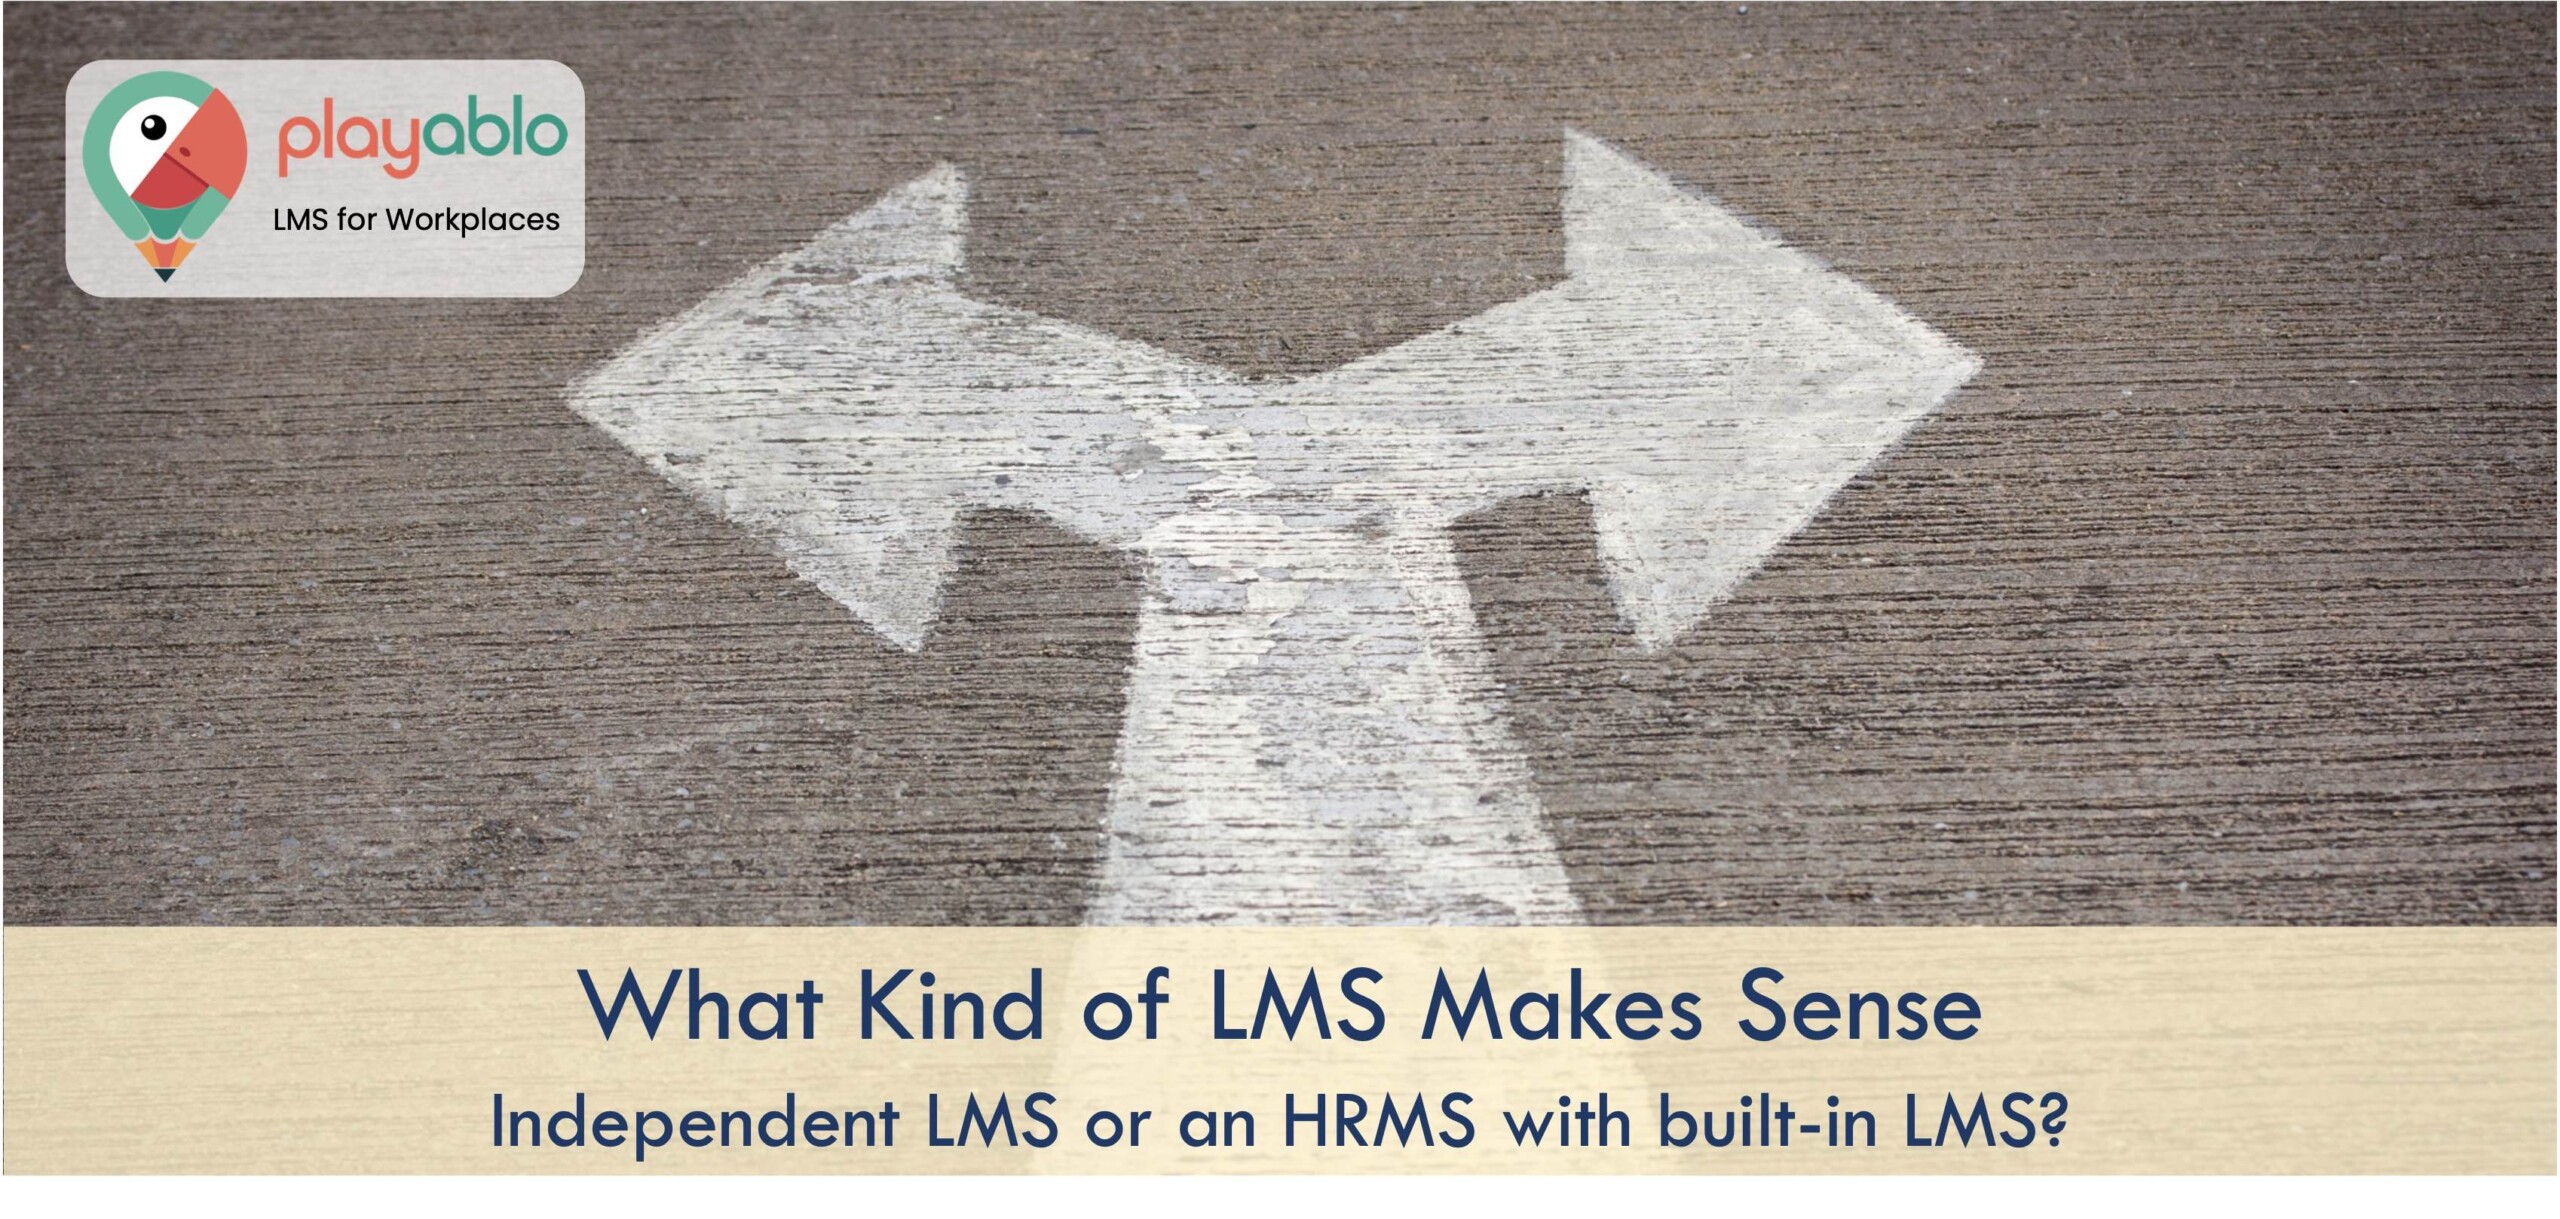 hrms-with-built-in-lms